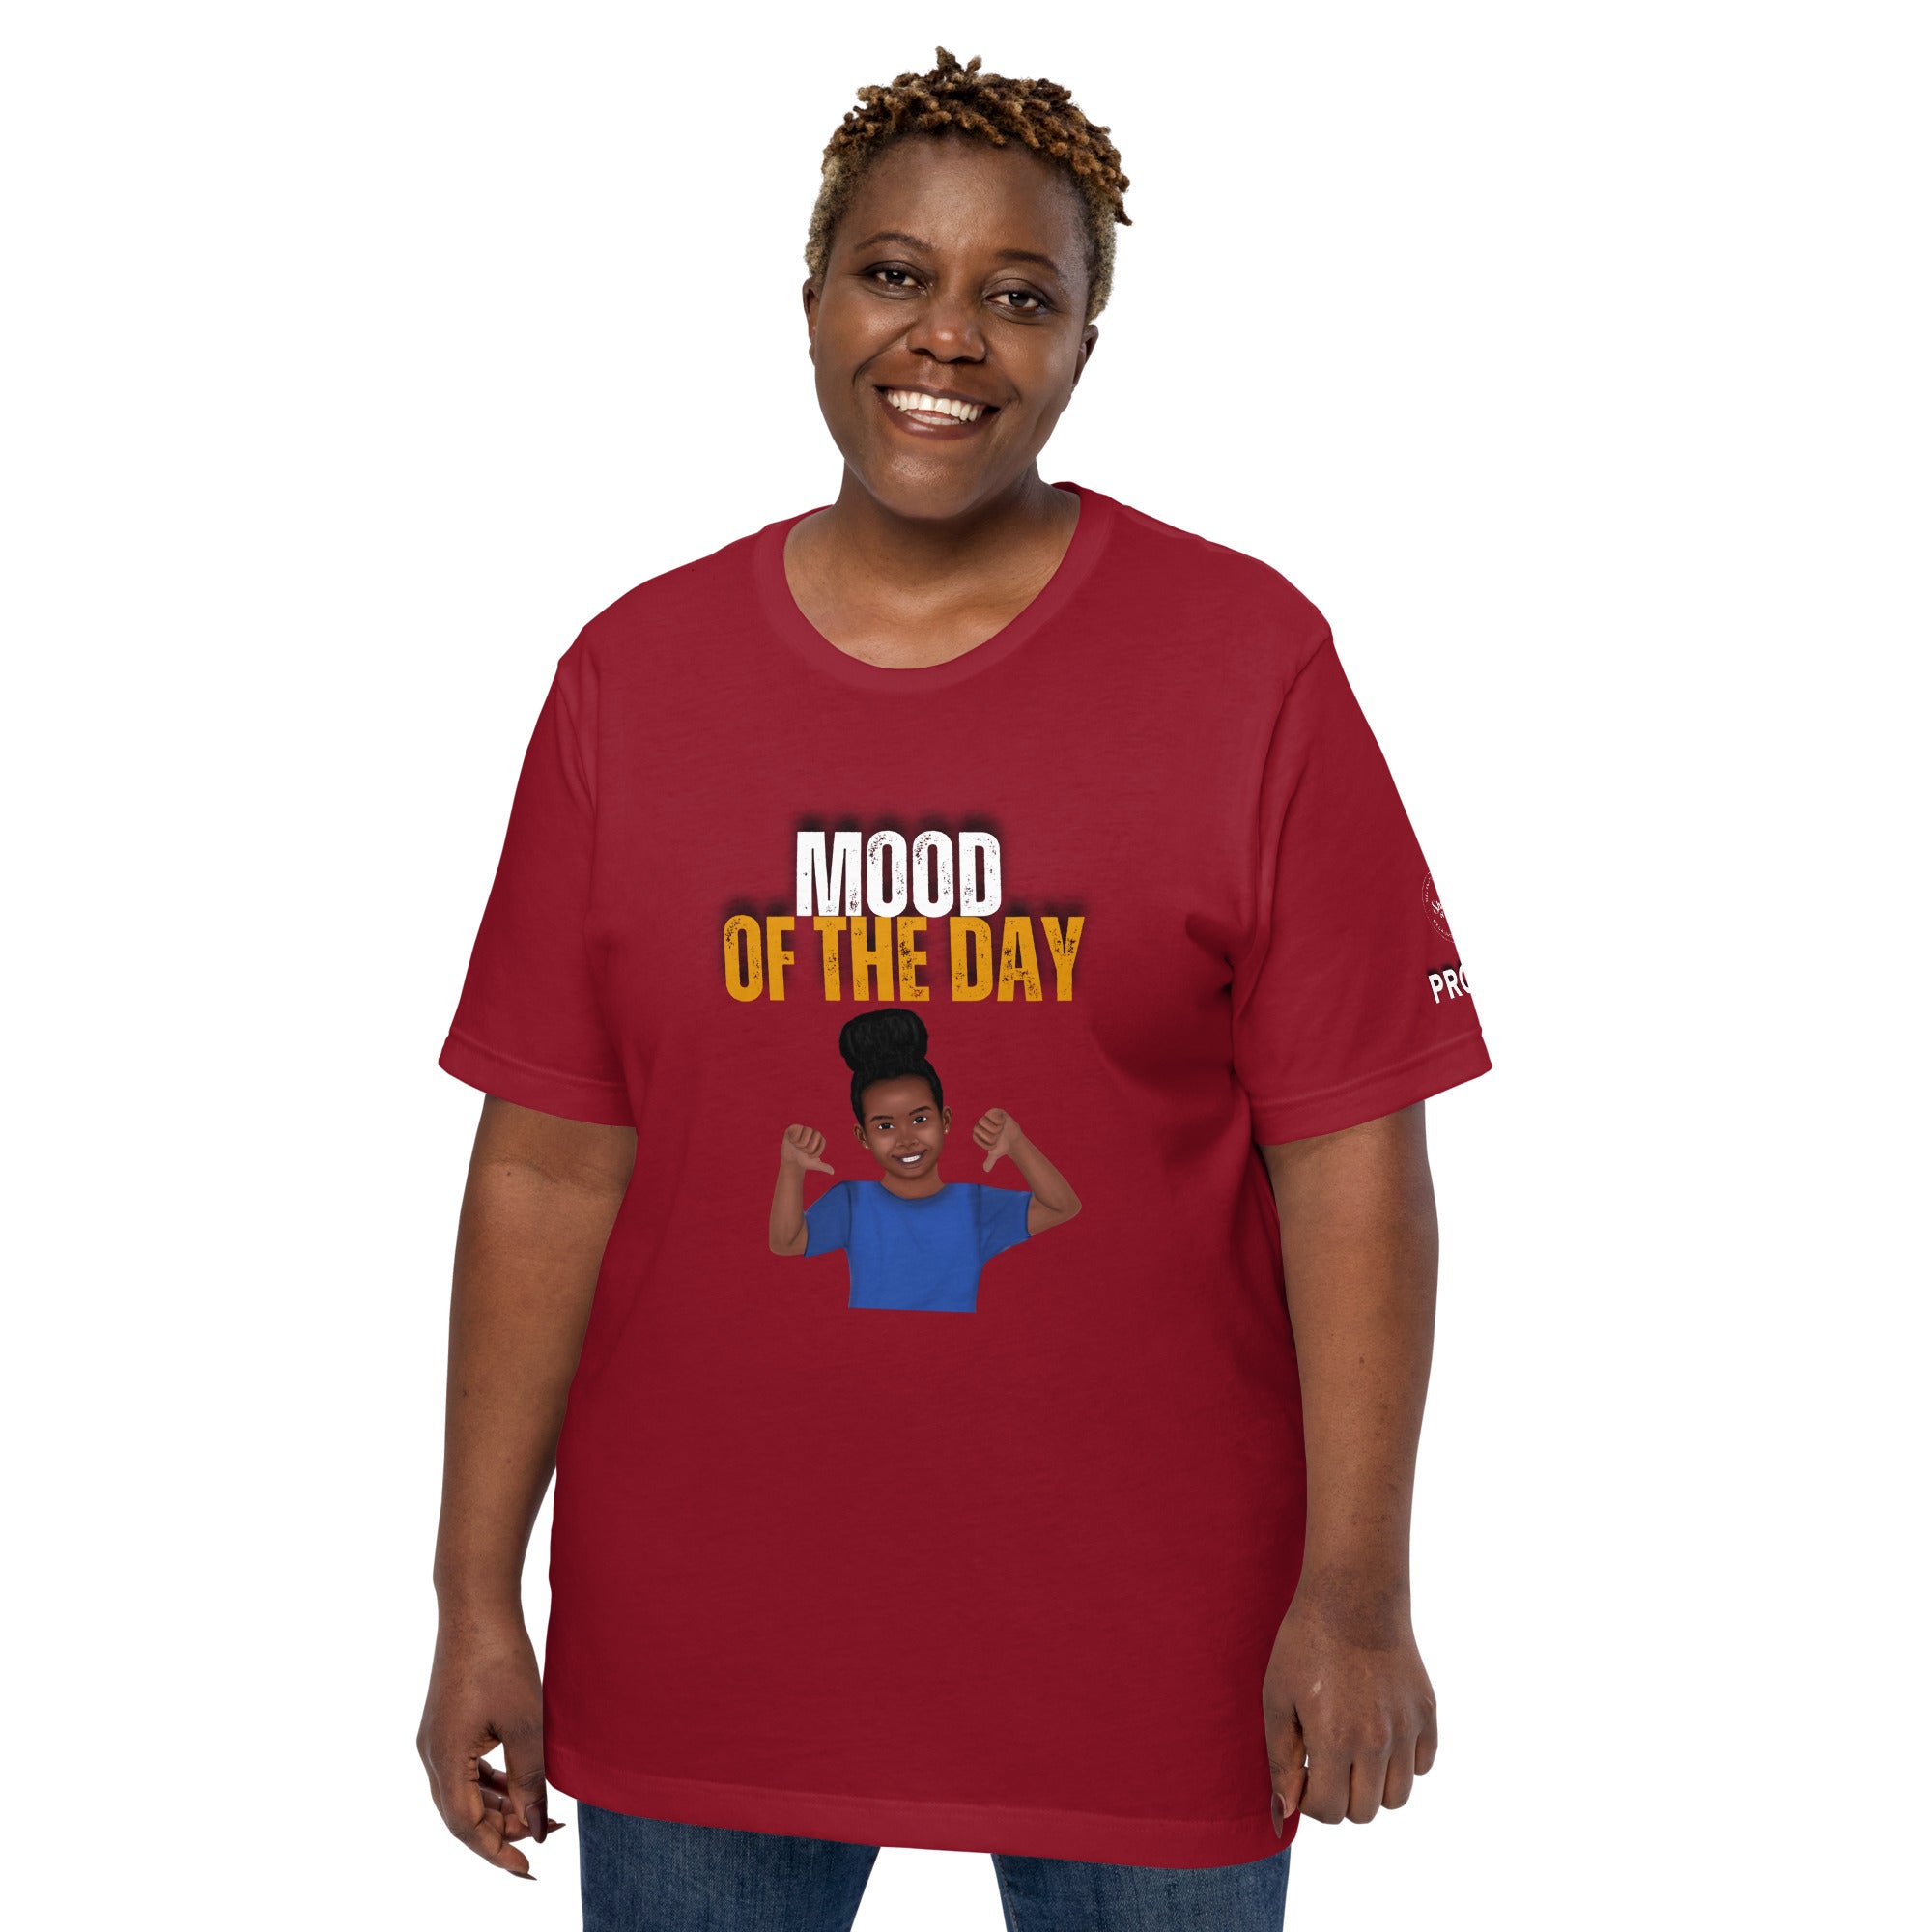 Mood of the Day T-shirt - Proud